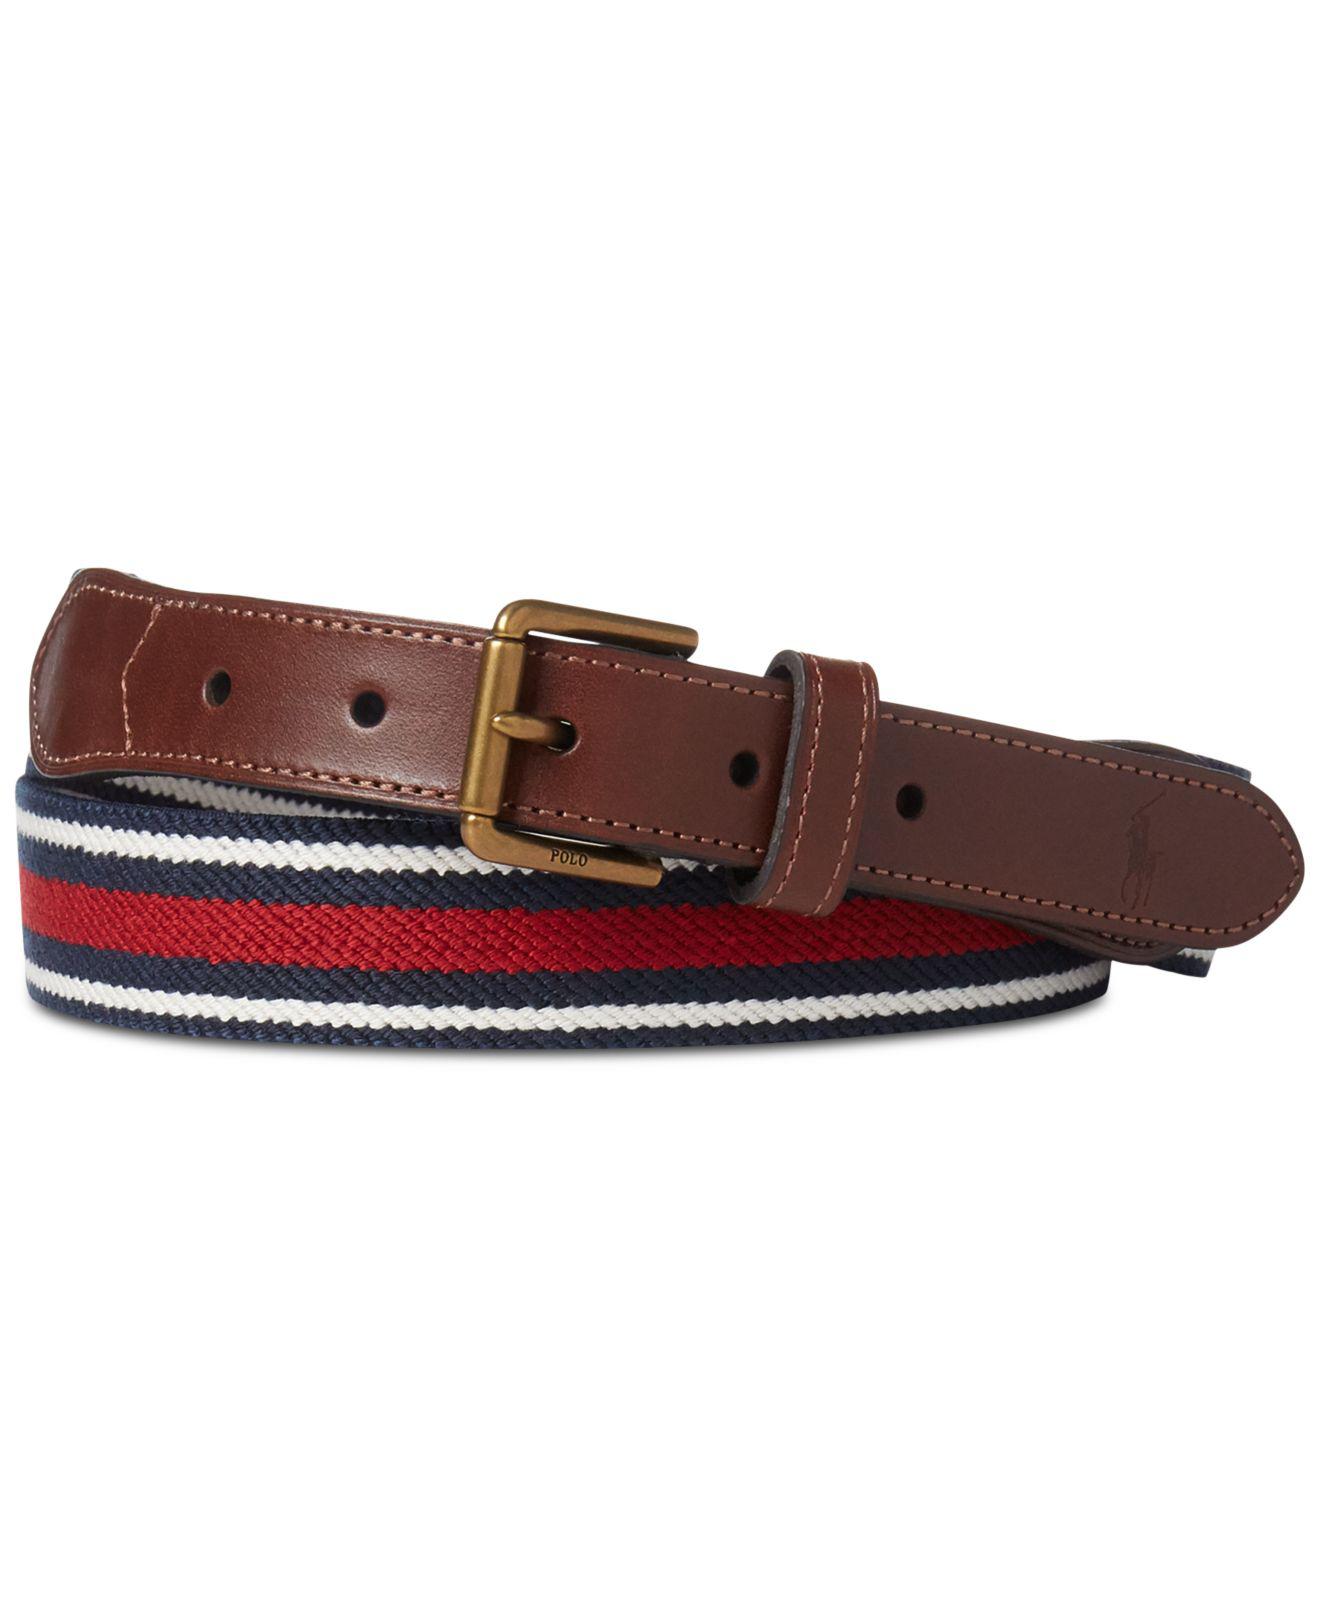 Polo Ralph Lauren Leather Striped Stretch Twill Belt in Navy/Cream/Red ...